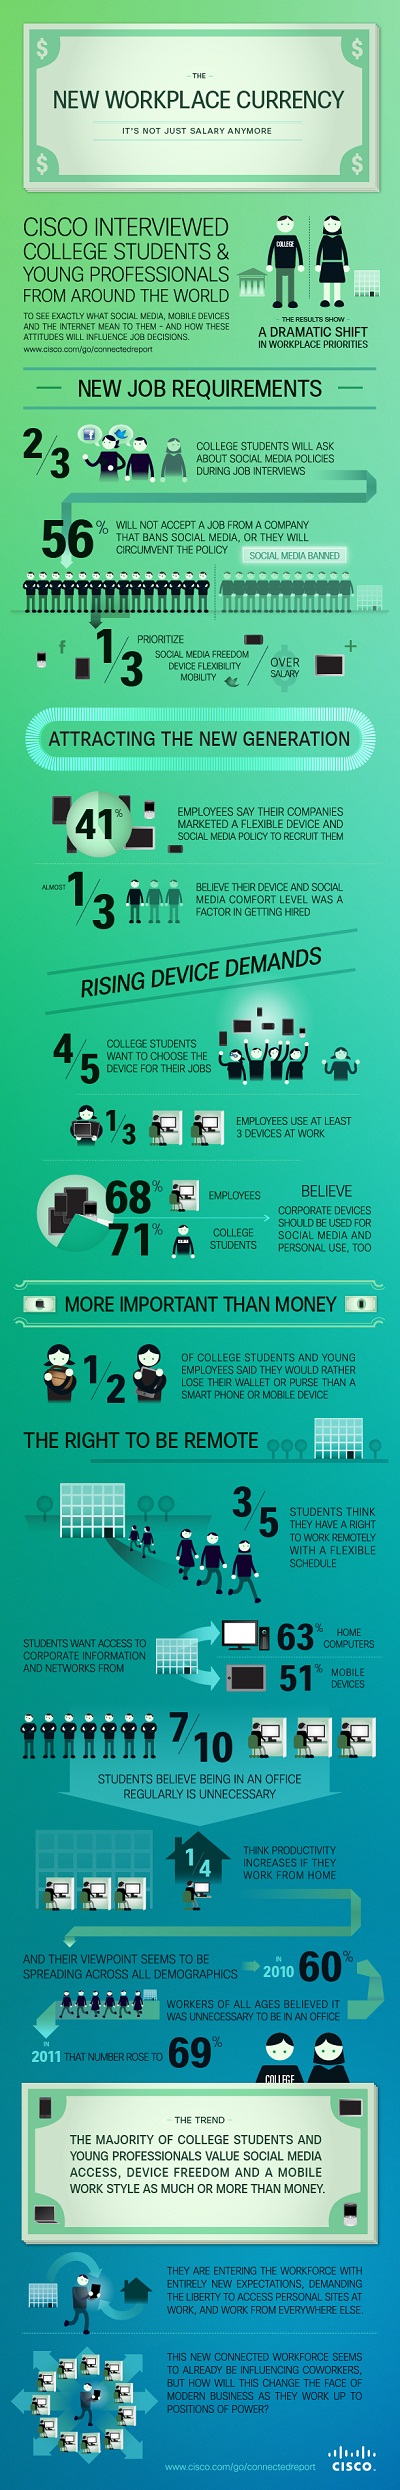 Technology Affects The Workforce Infographic